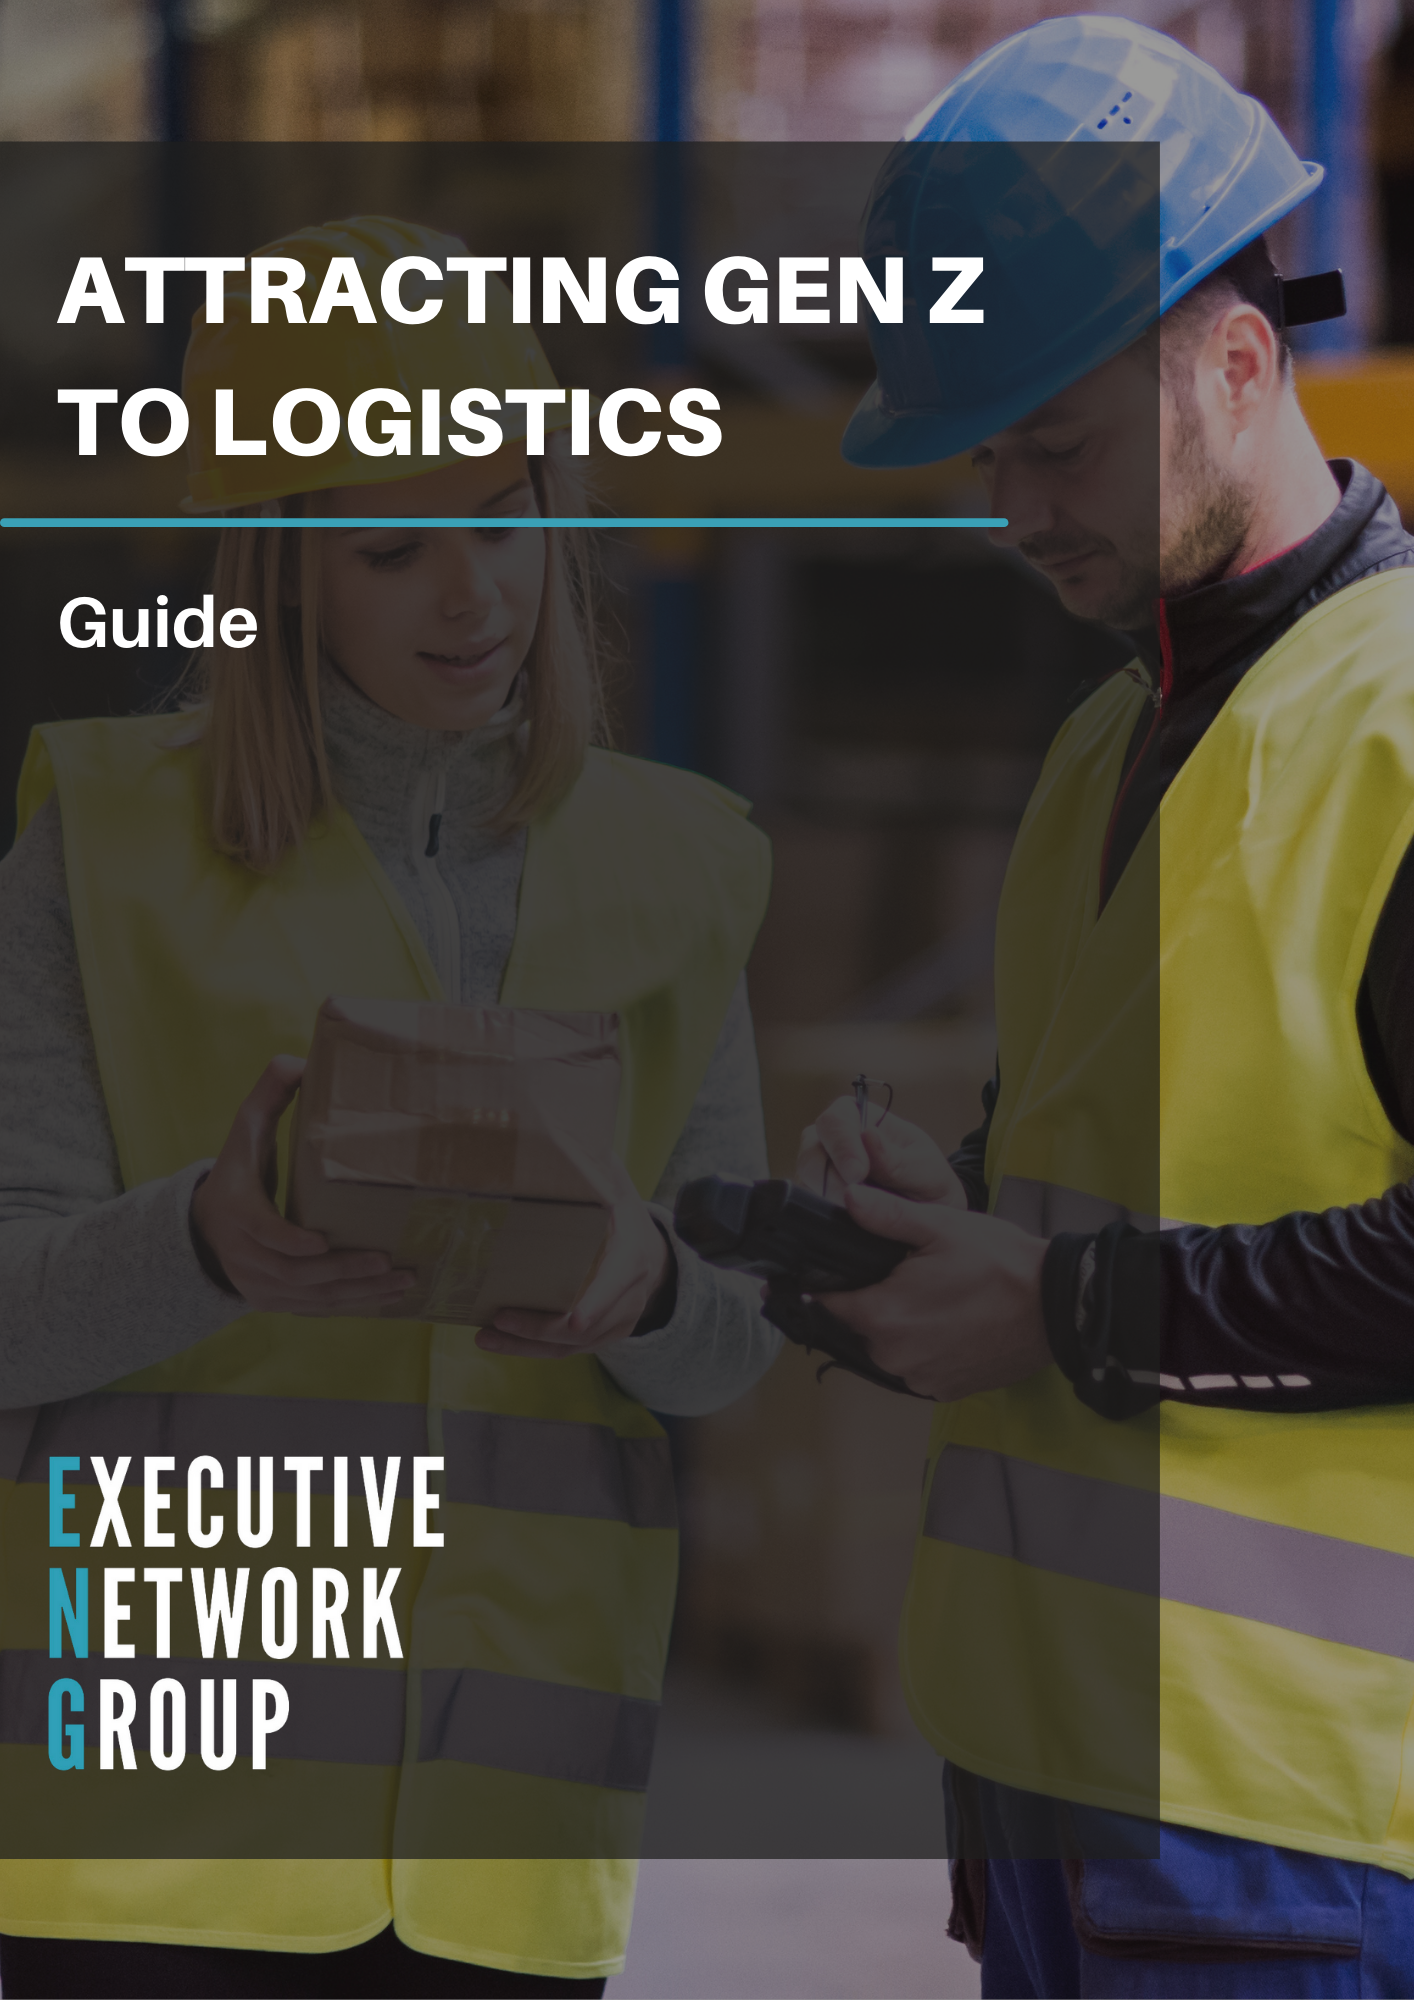 Attracting Gen Z to Logistics Guide